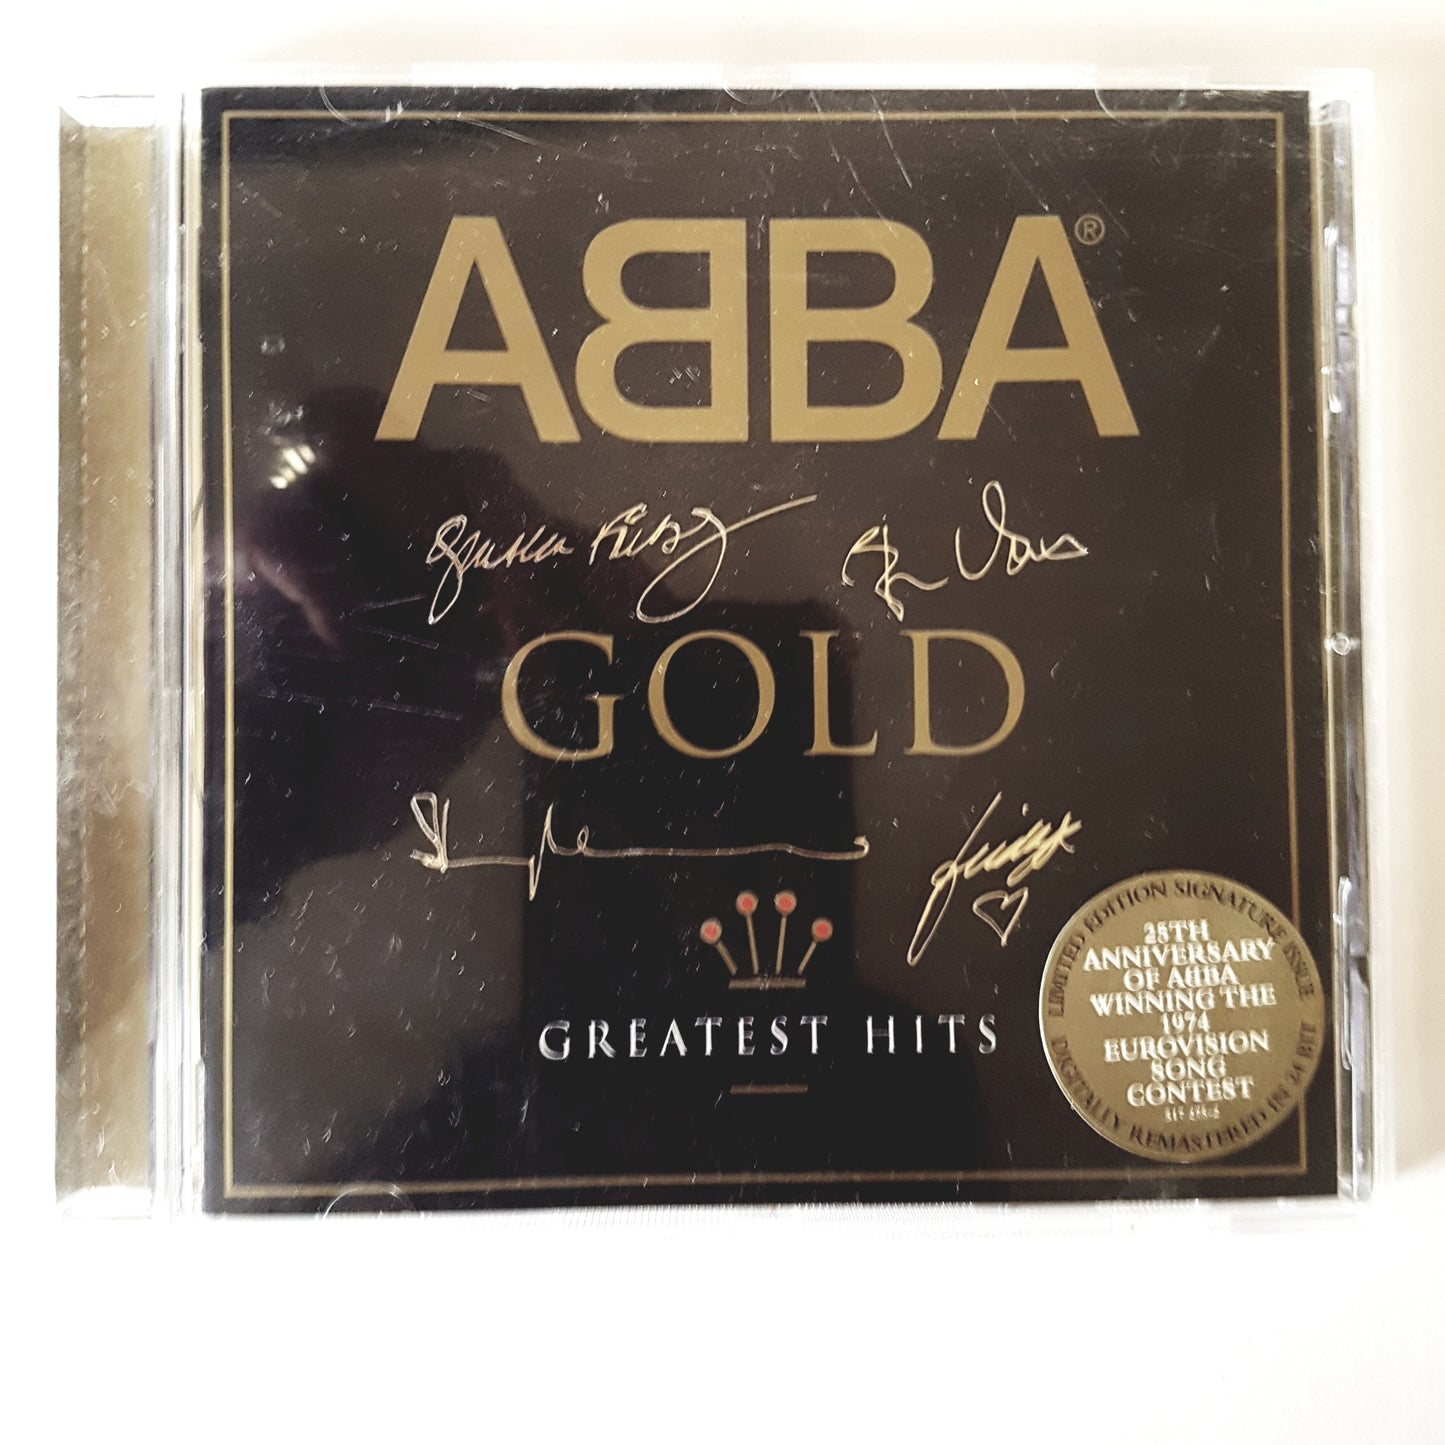 ABBA, Gold Greatest Hits (1CD)